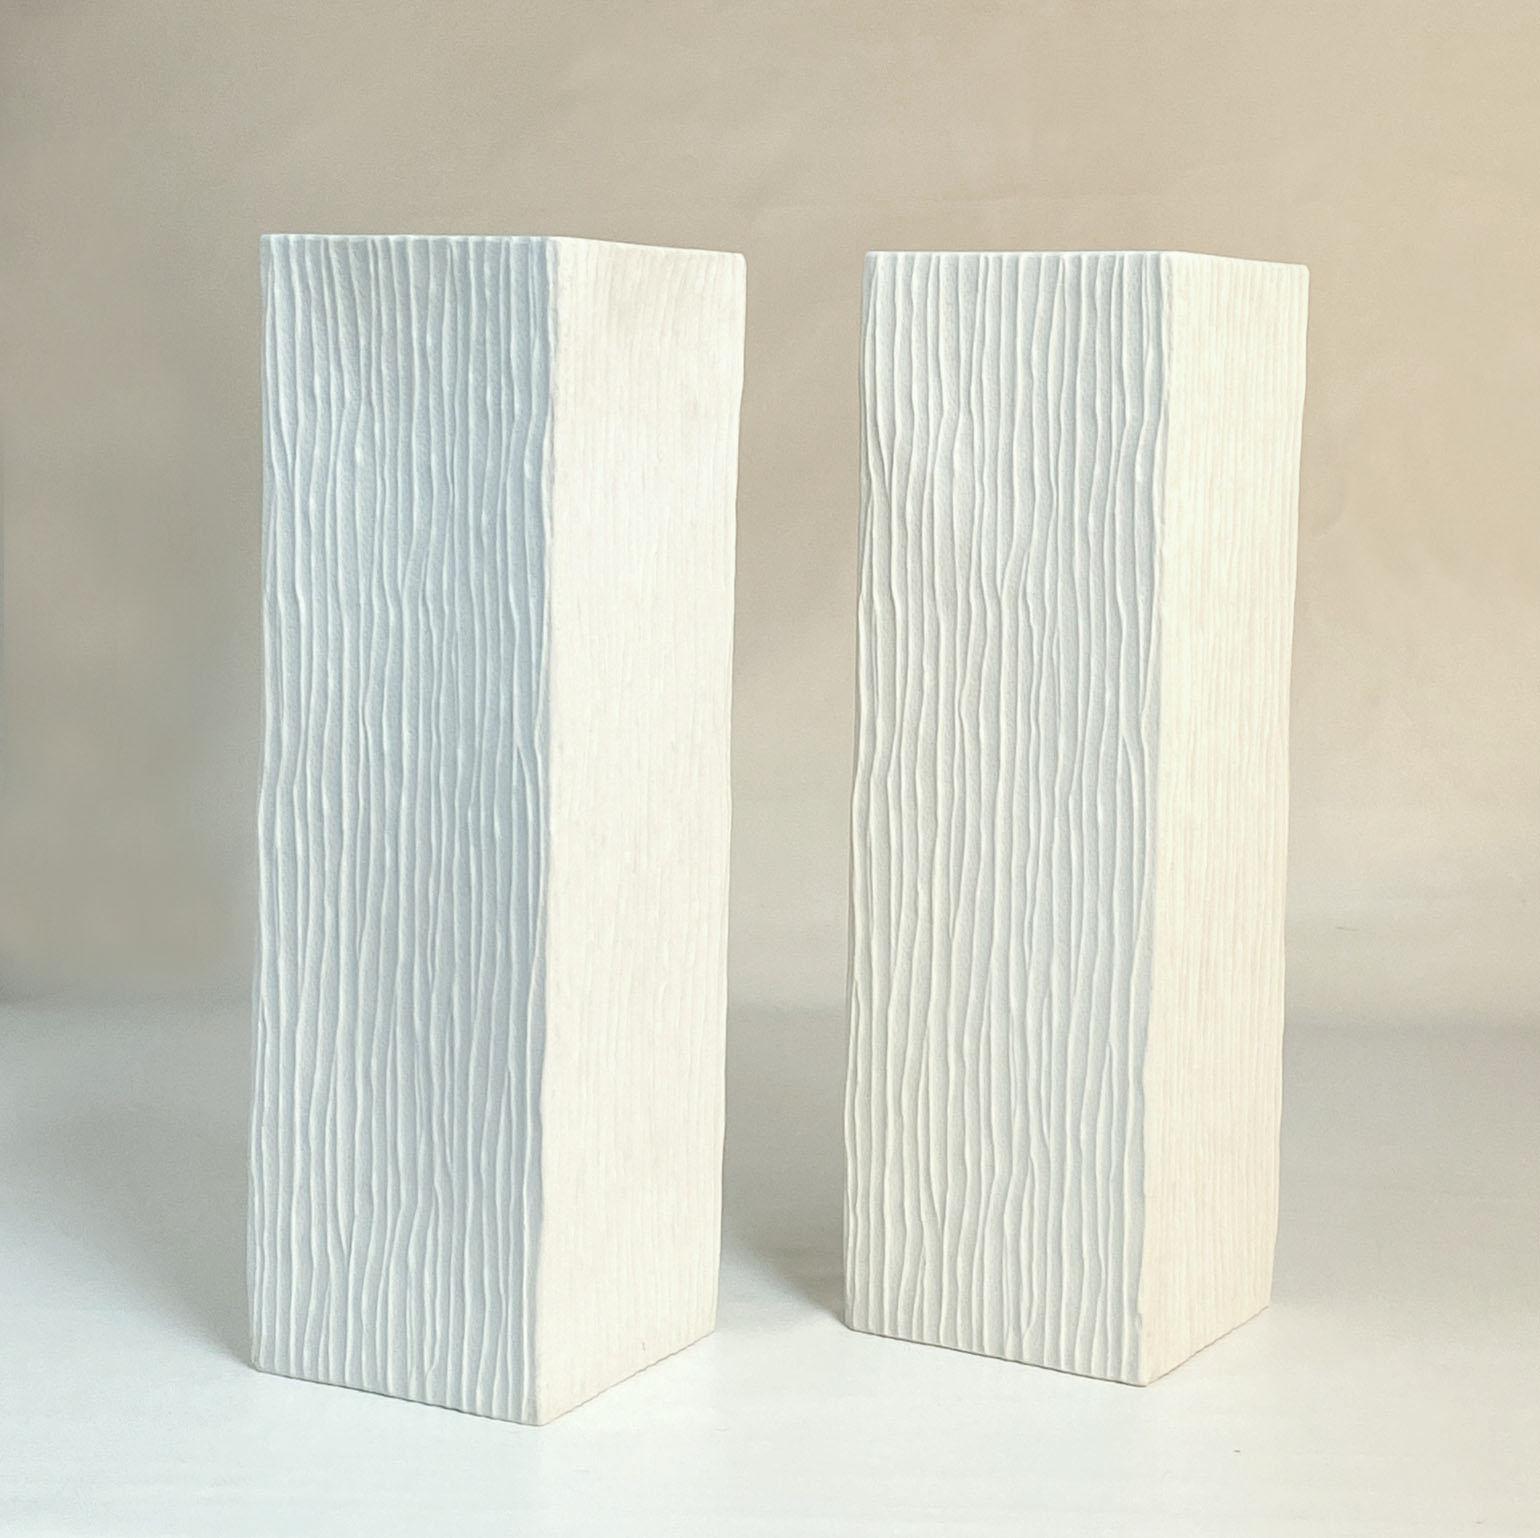 Pair of tall white porcelain square vases with vertical relief surface, by Hutschenreuther Germany, 1960's.
